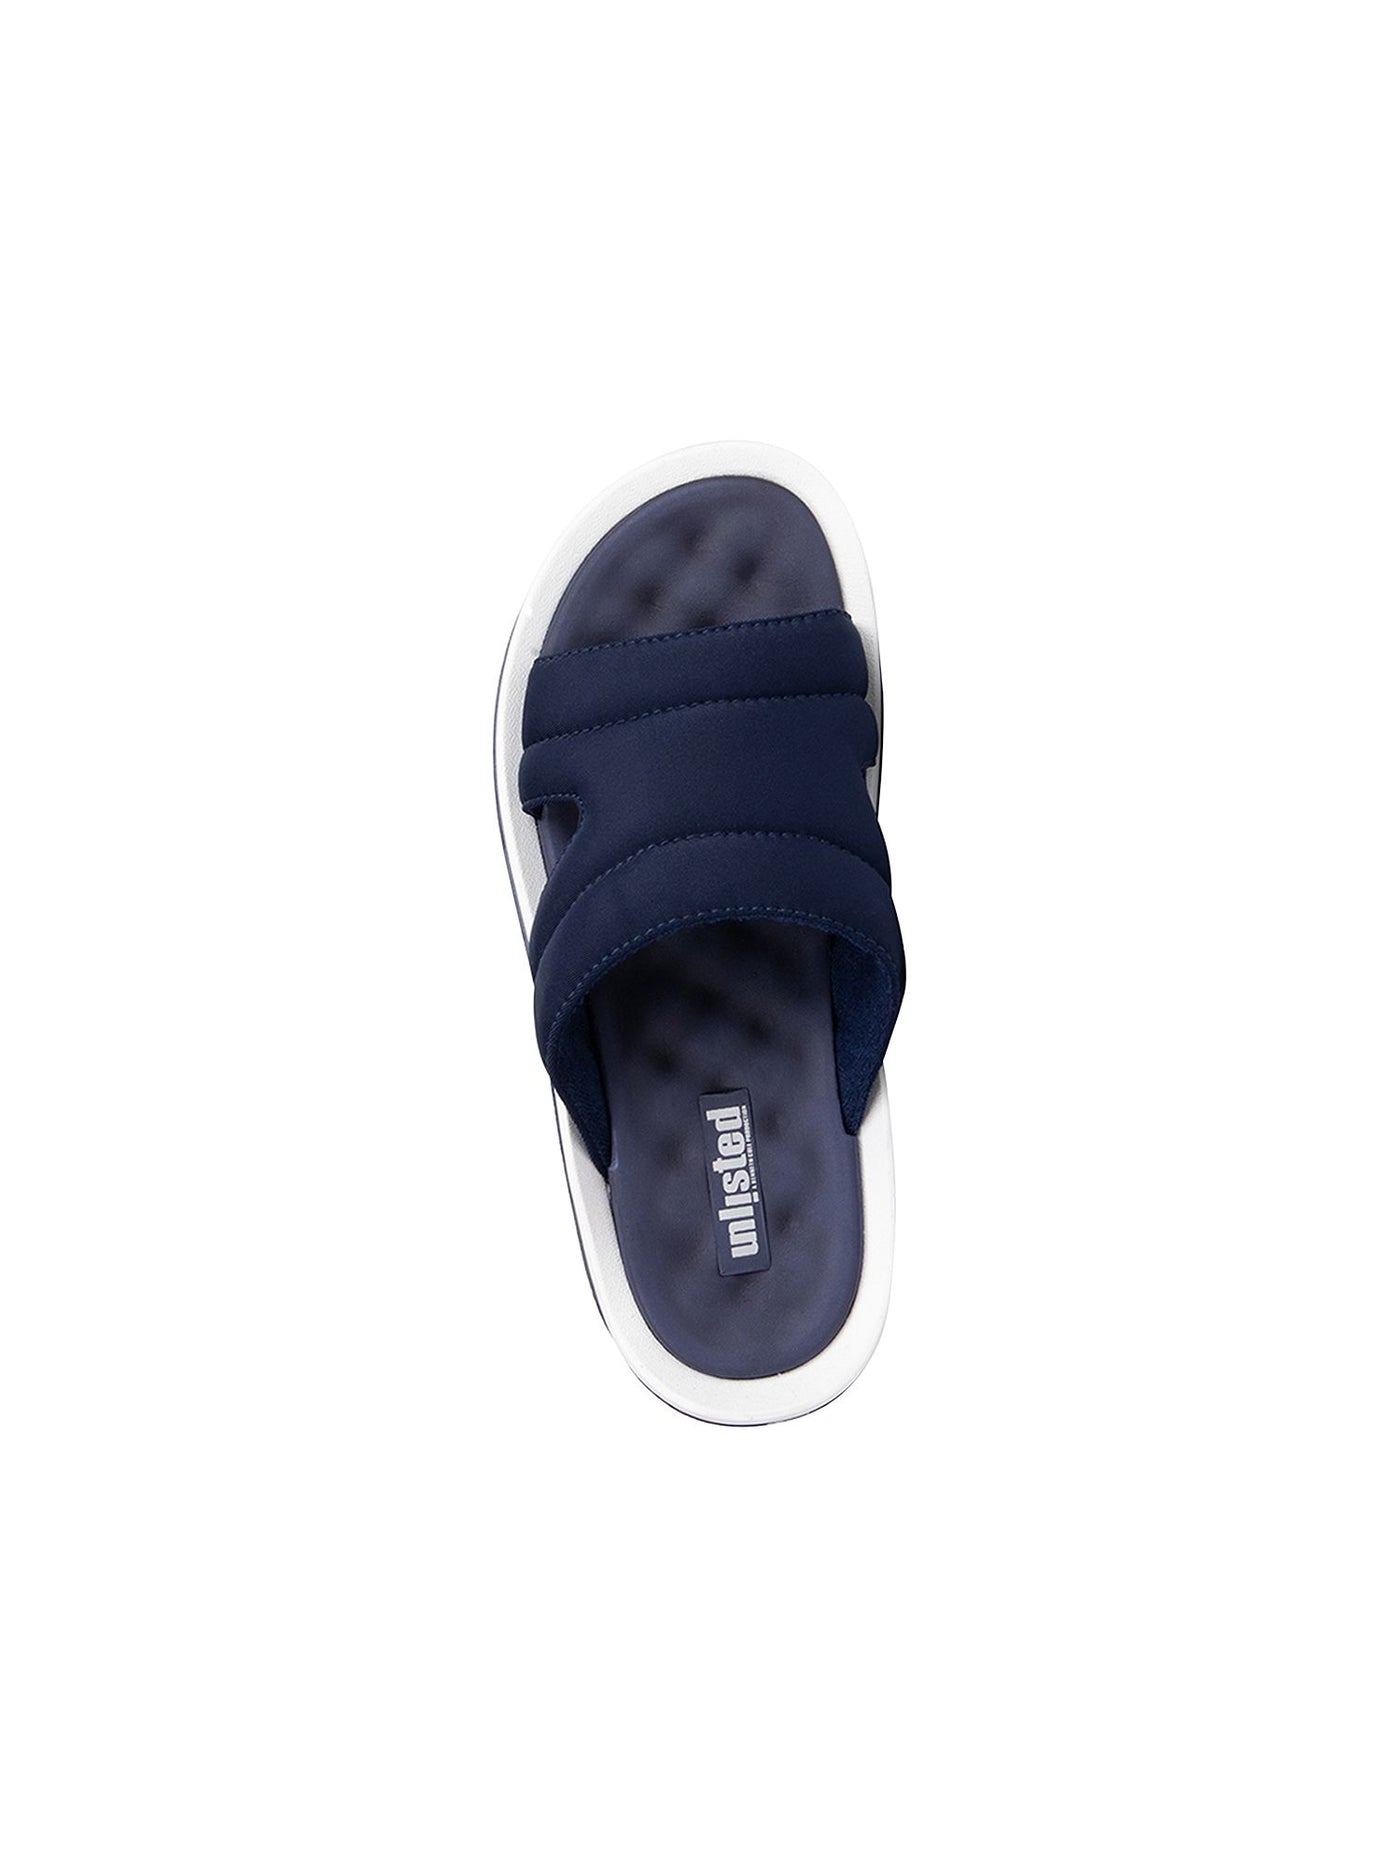 UNLISTED by KENNETH COLE Mens Navy Cut Out Quilted Quinn Round Toe Slip On Slide Sandals Shoes 12 M